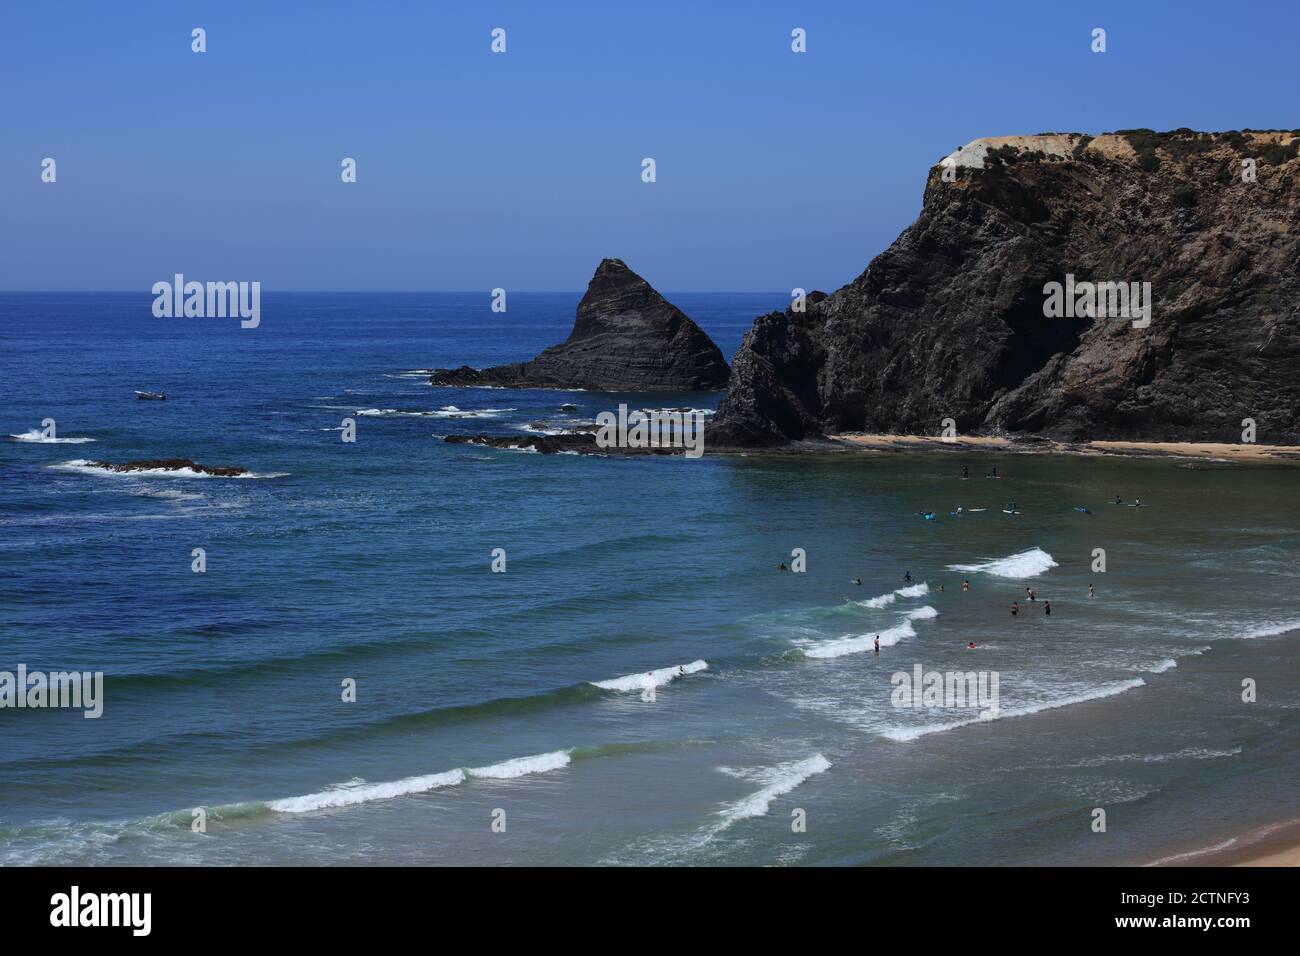 Portugal, Algarve Region, Odeceixe, South-West Alentejo and Vicentine Coast Natural Park cliff top view of the waves washing onto Odeceixe beach. Stock Photo